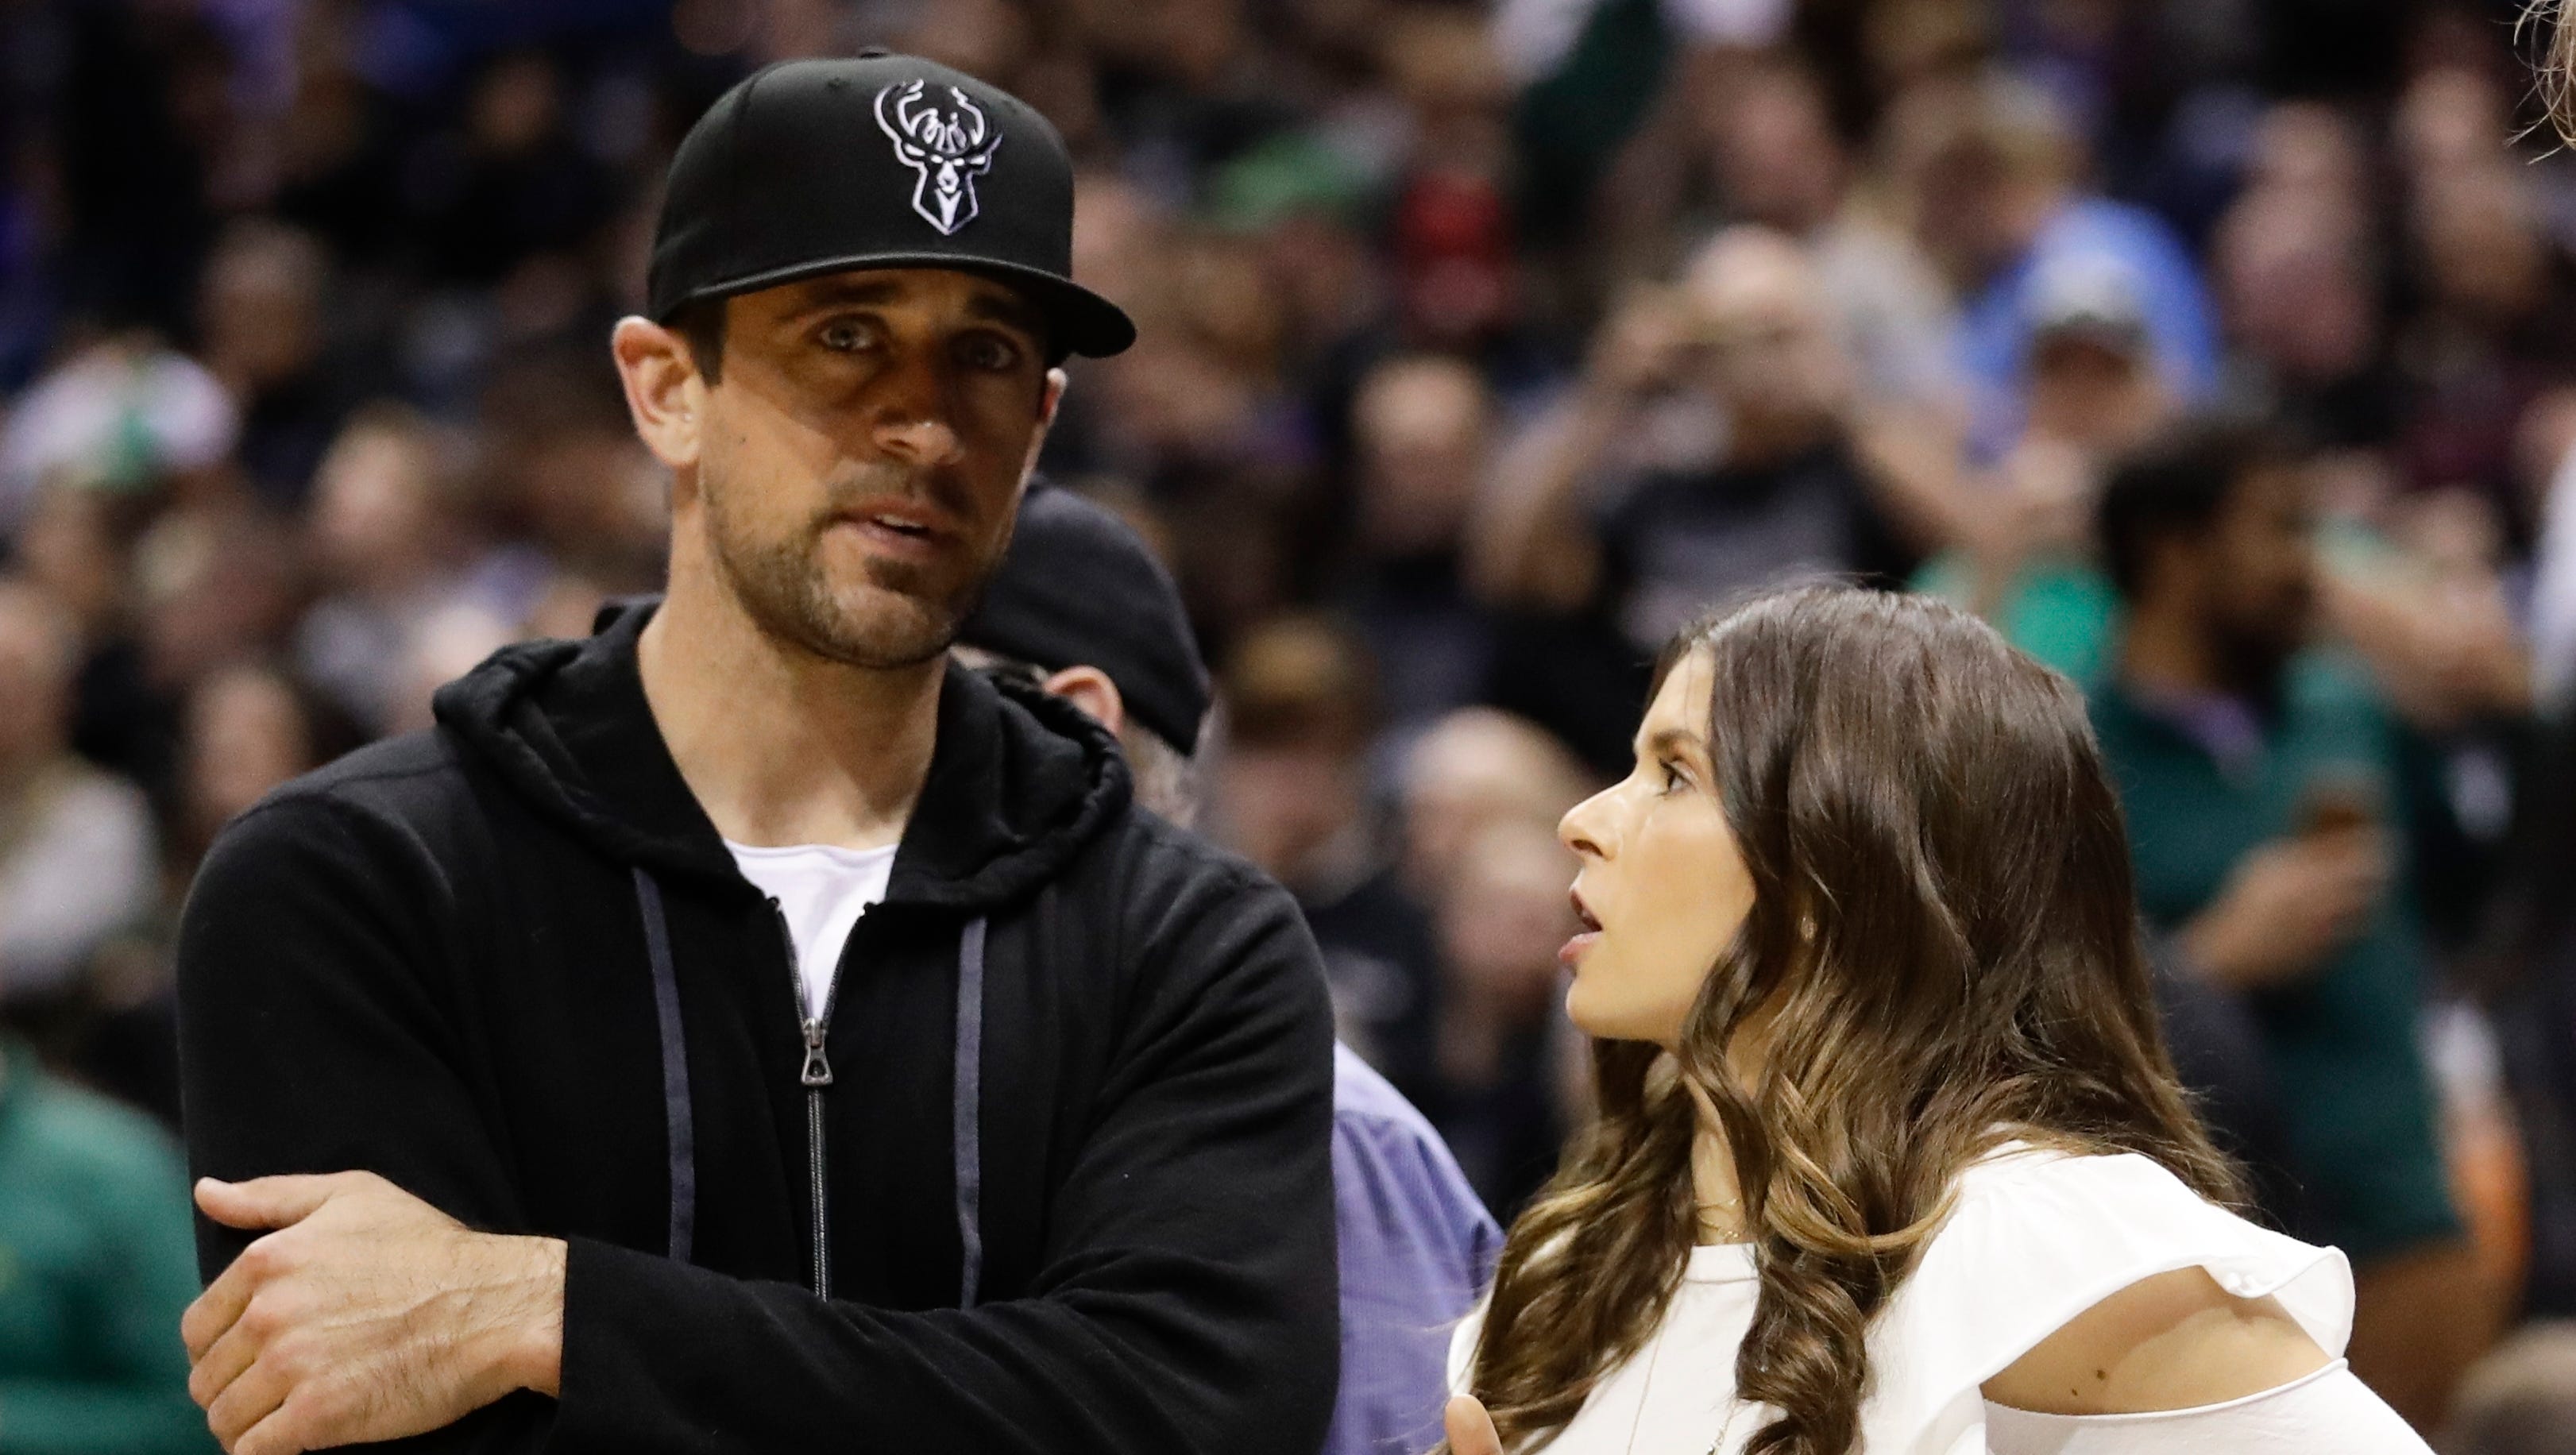 Green Bay Packers QB Aaron Rodgers talks with Danica Patrick at Game 3 on Friday night in Milwaukee.